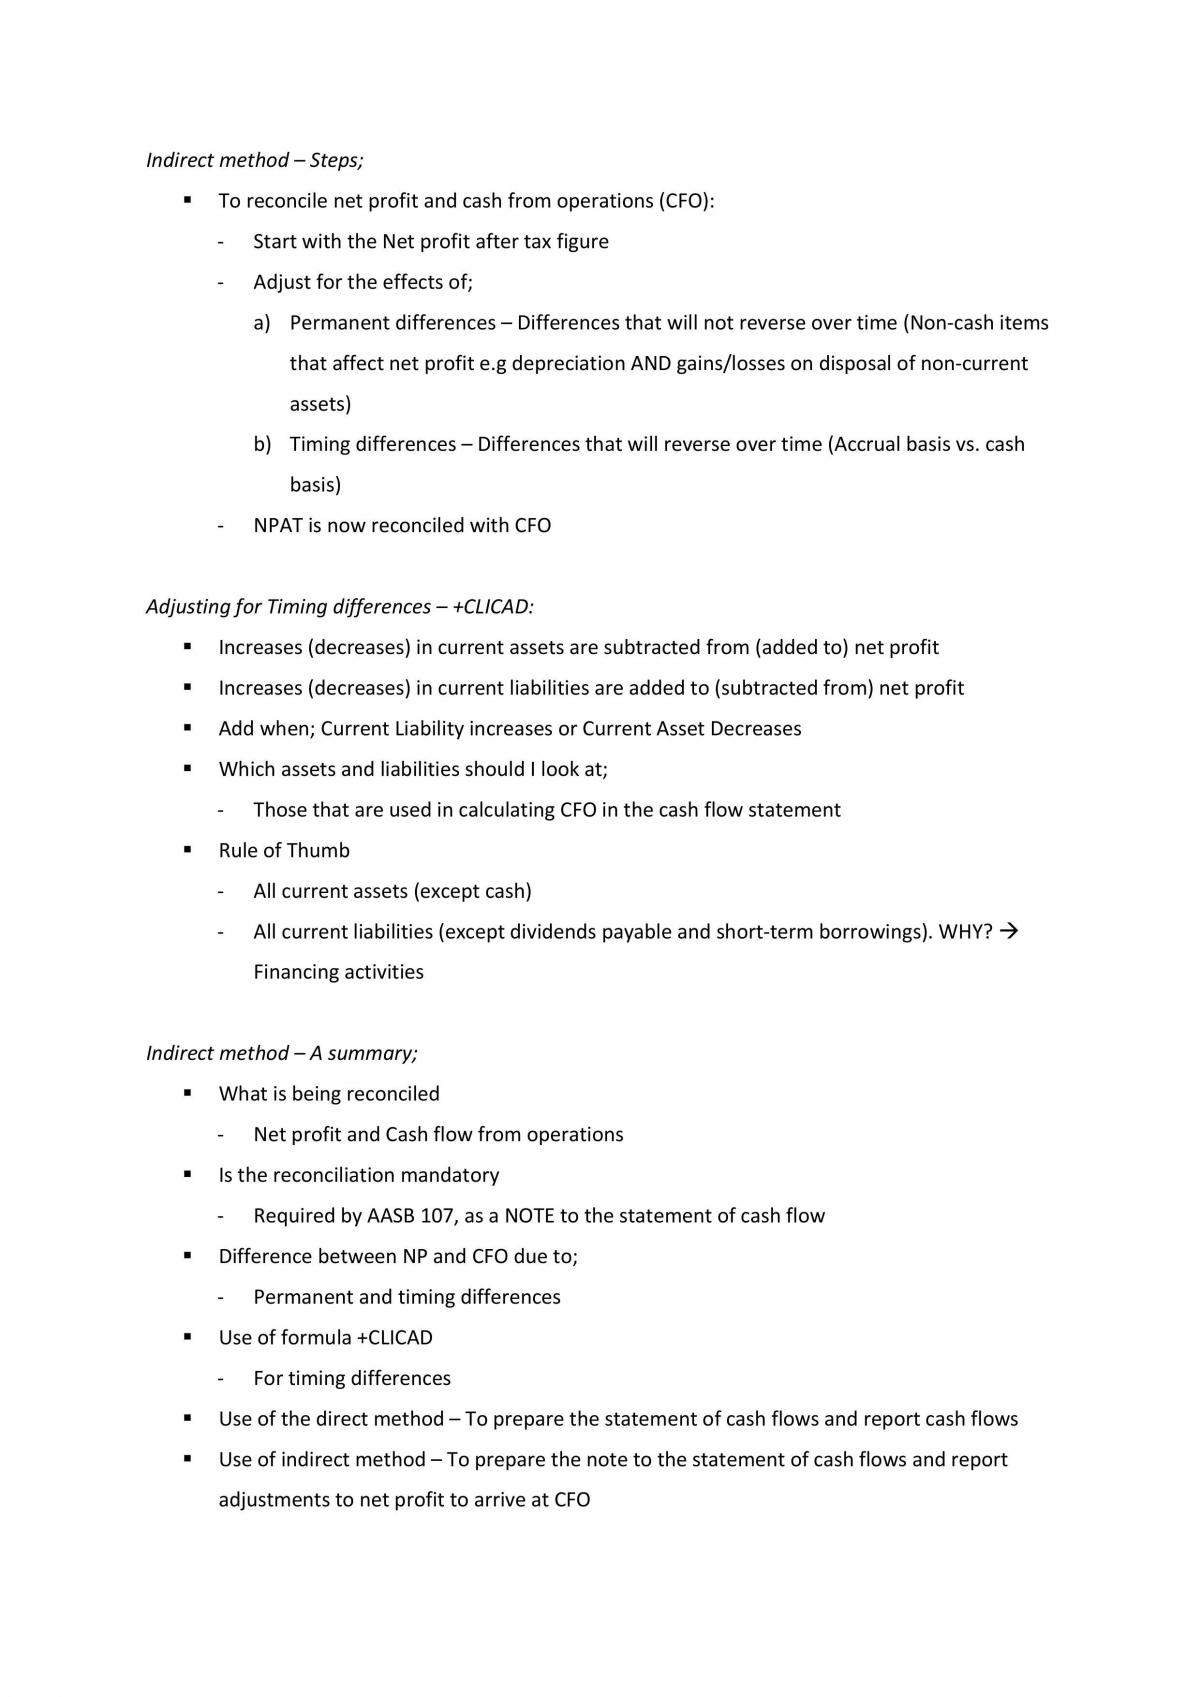 ACCT1511 HD Notes *94/100* - Page 42